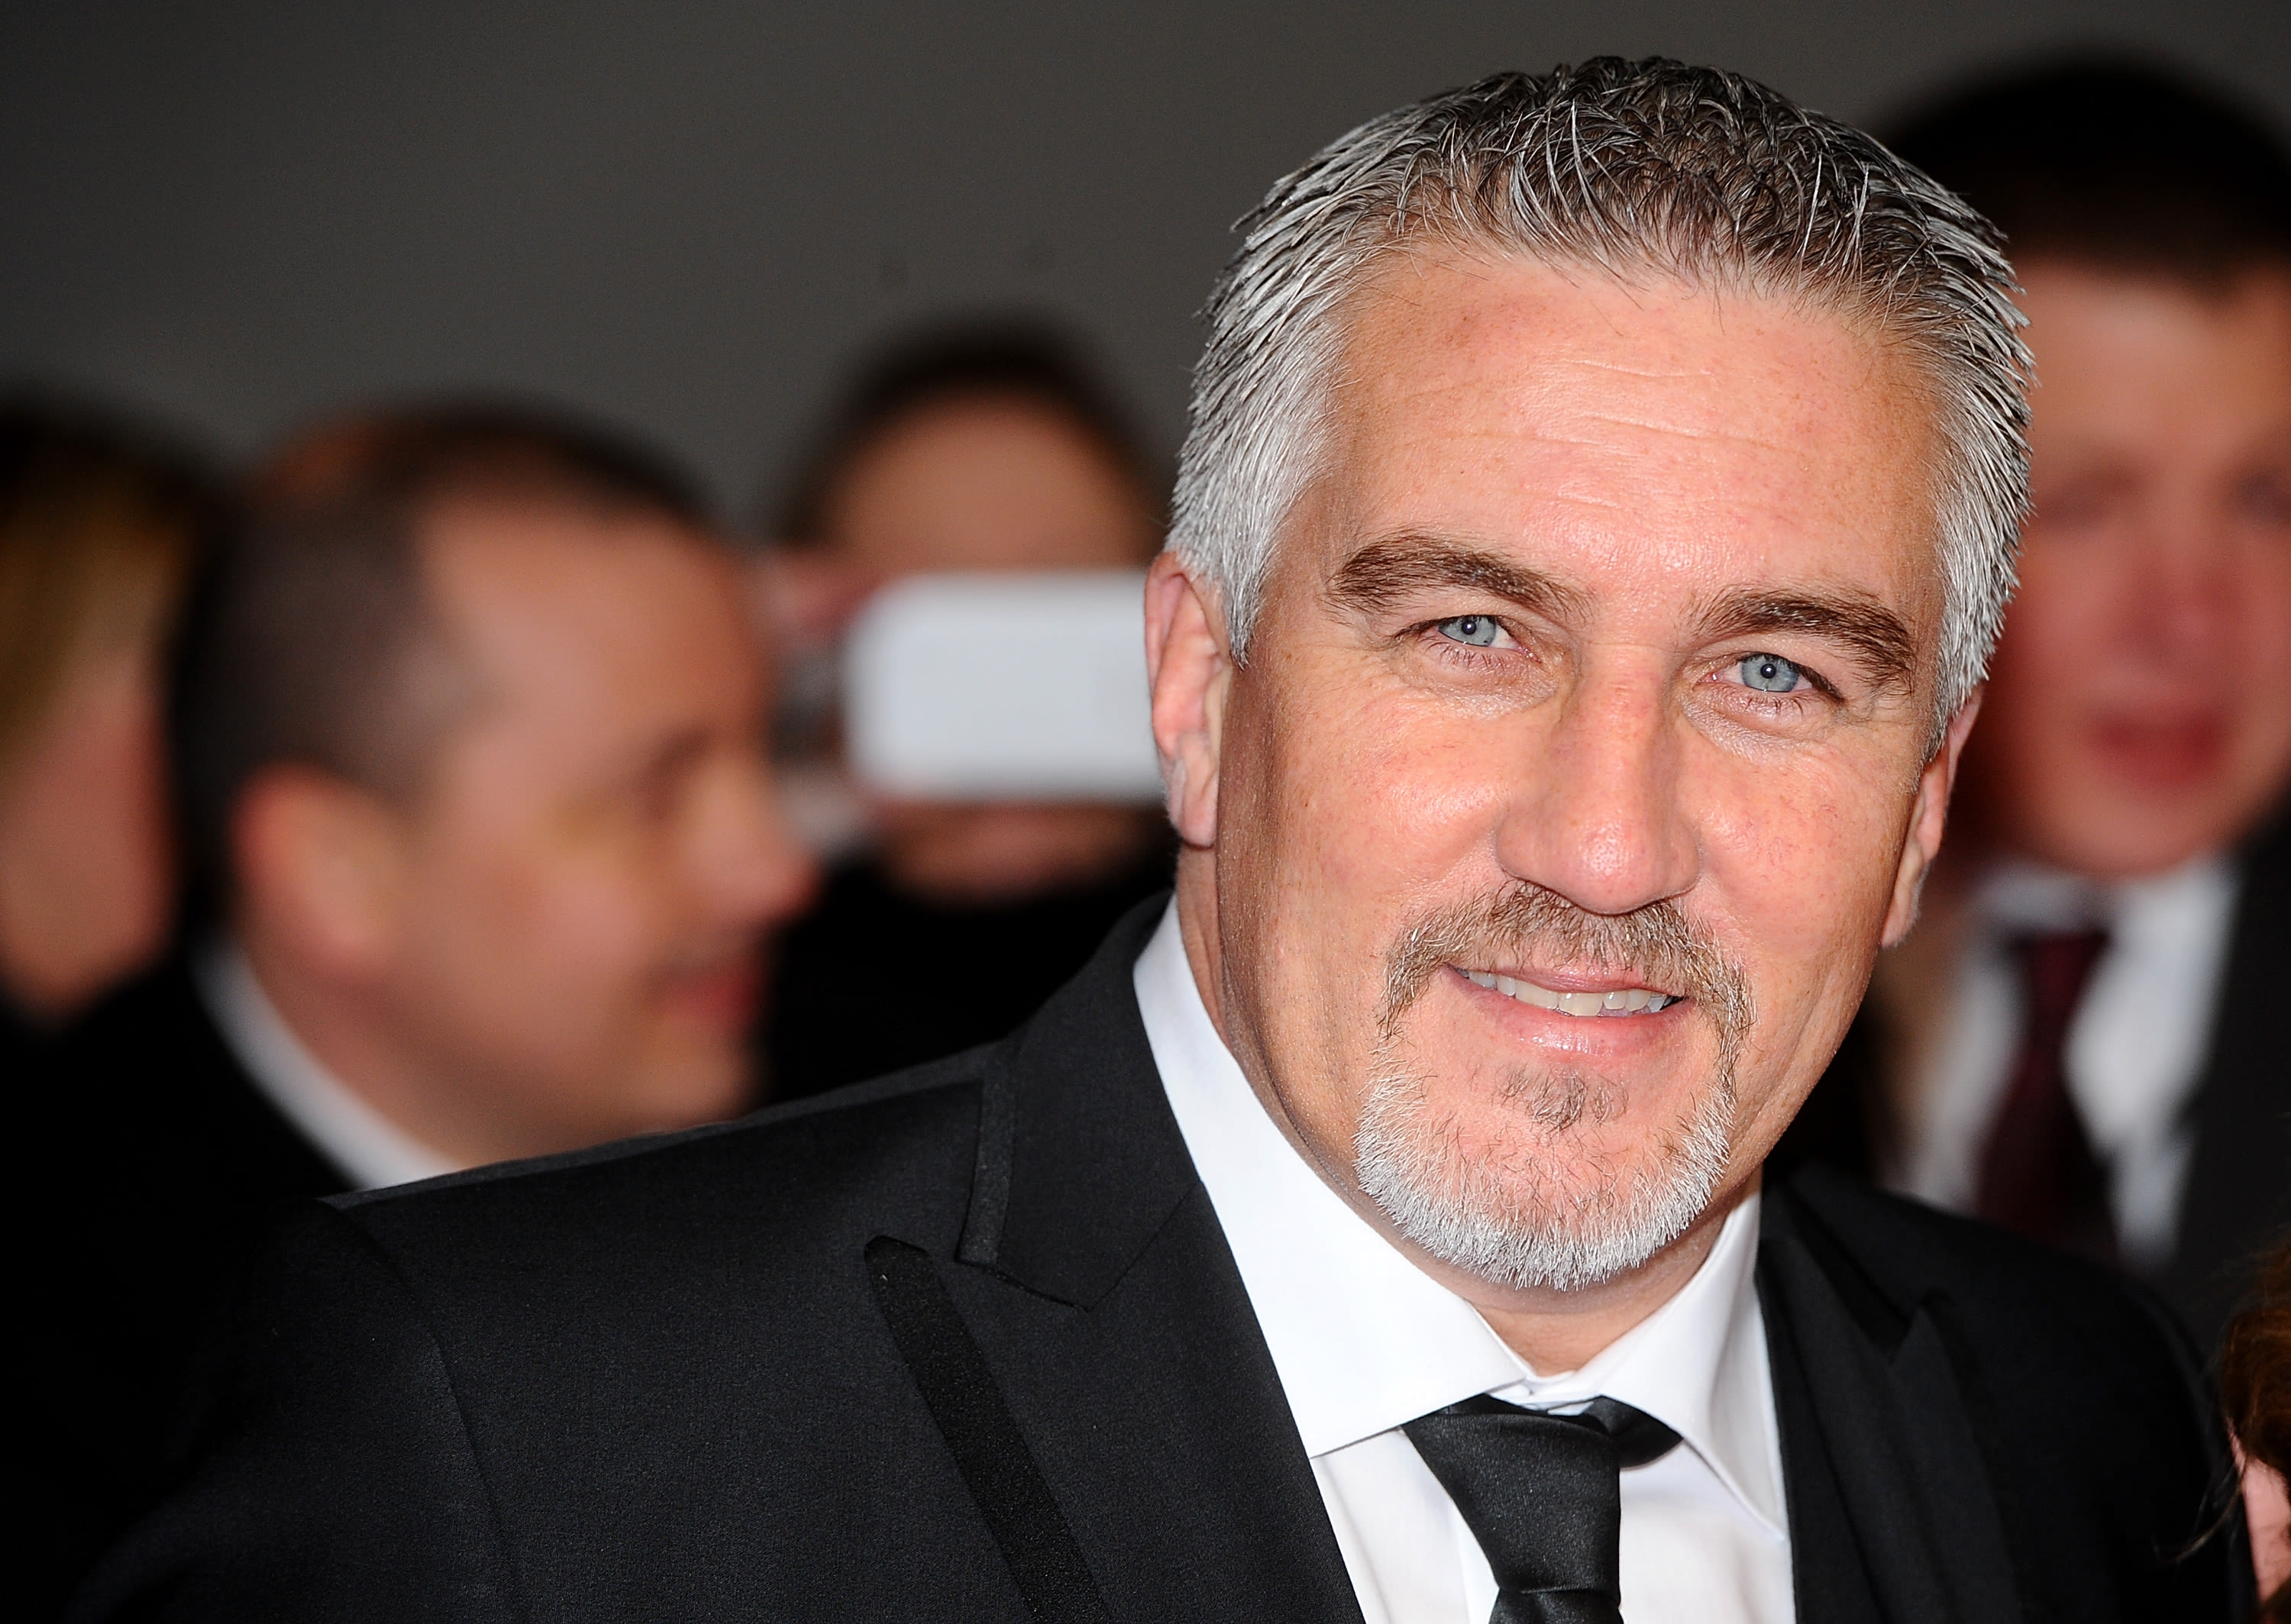 Paul Hollywood is right: Don’t refrigerate bread